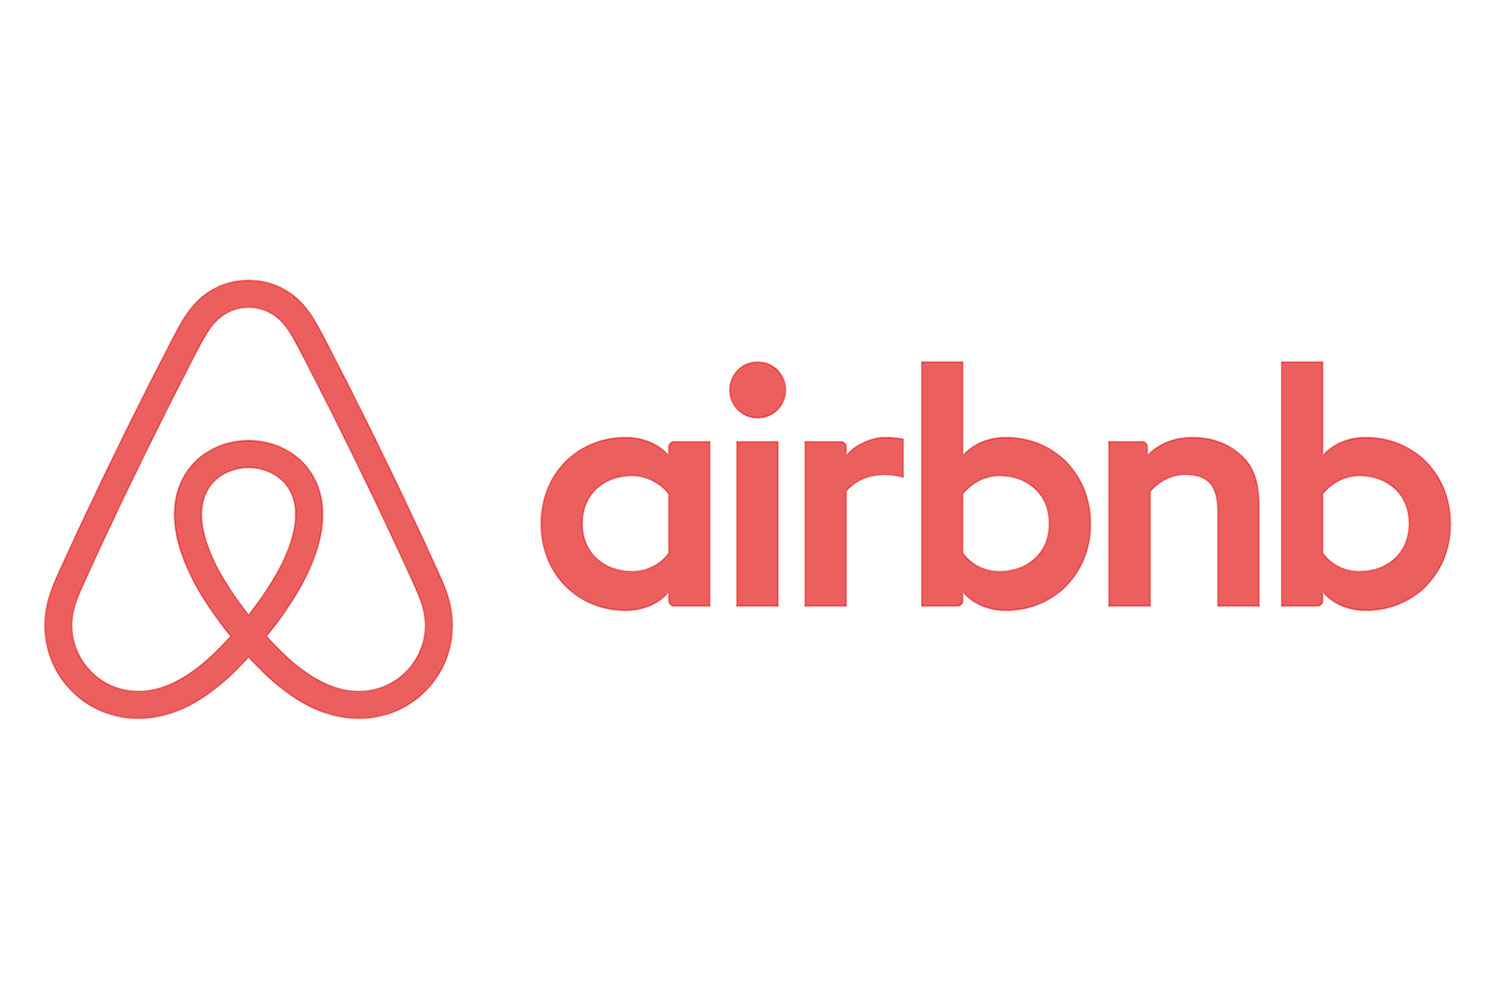 Govt's plans to embrace Airbnb 'sharing economy'